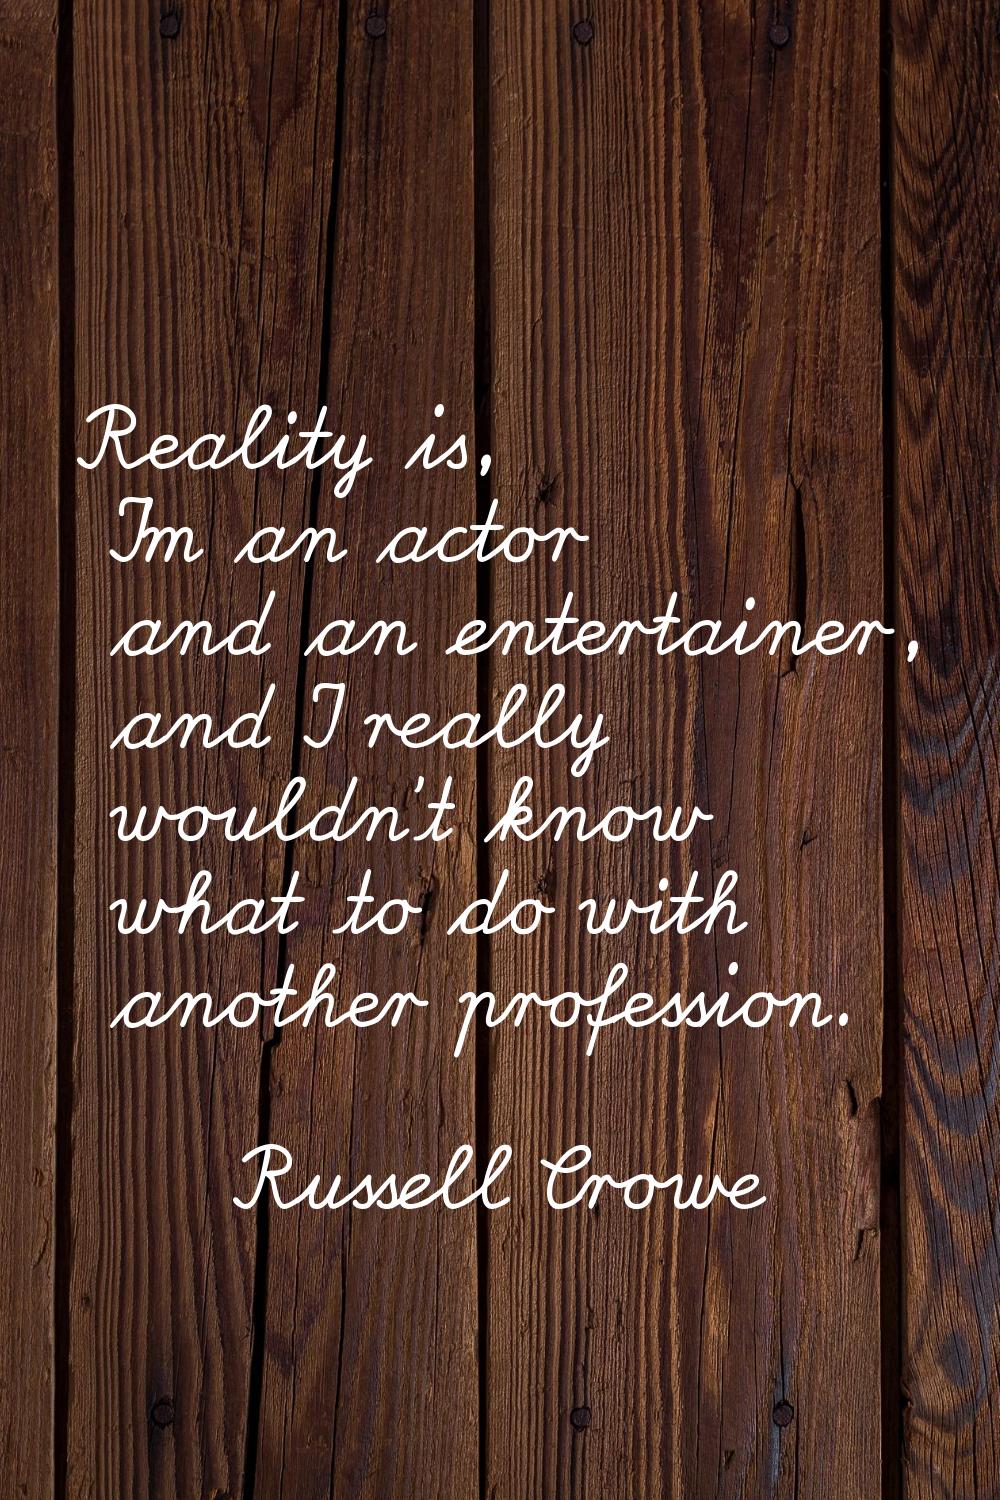 Reality is, I'm an actor and an entertainer, and I really wouldn't know what to do with another pro